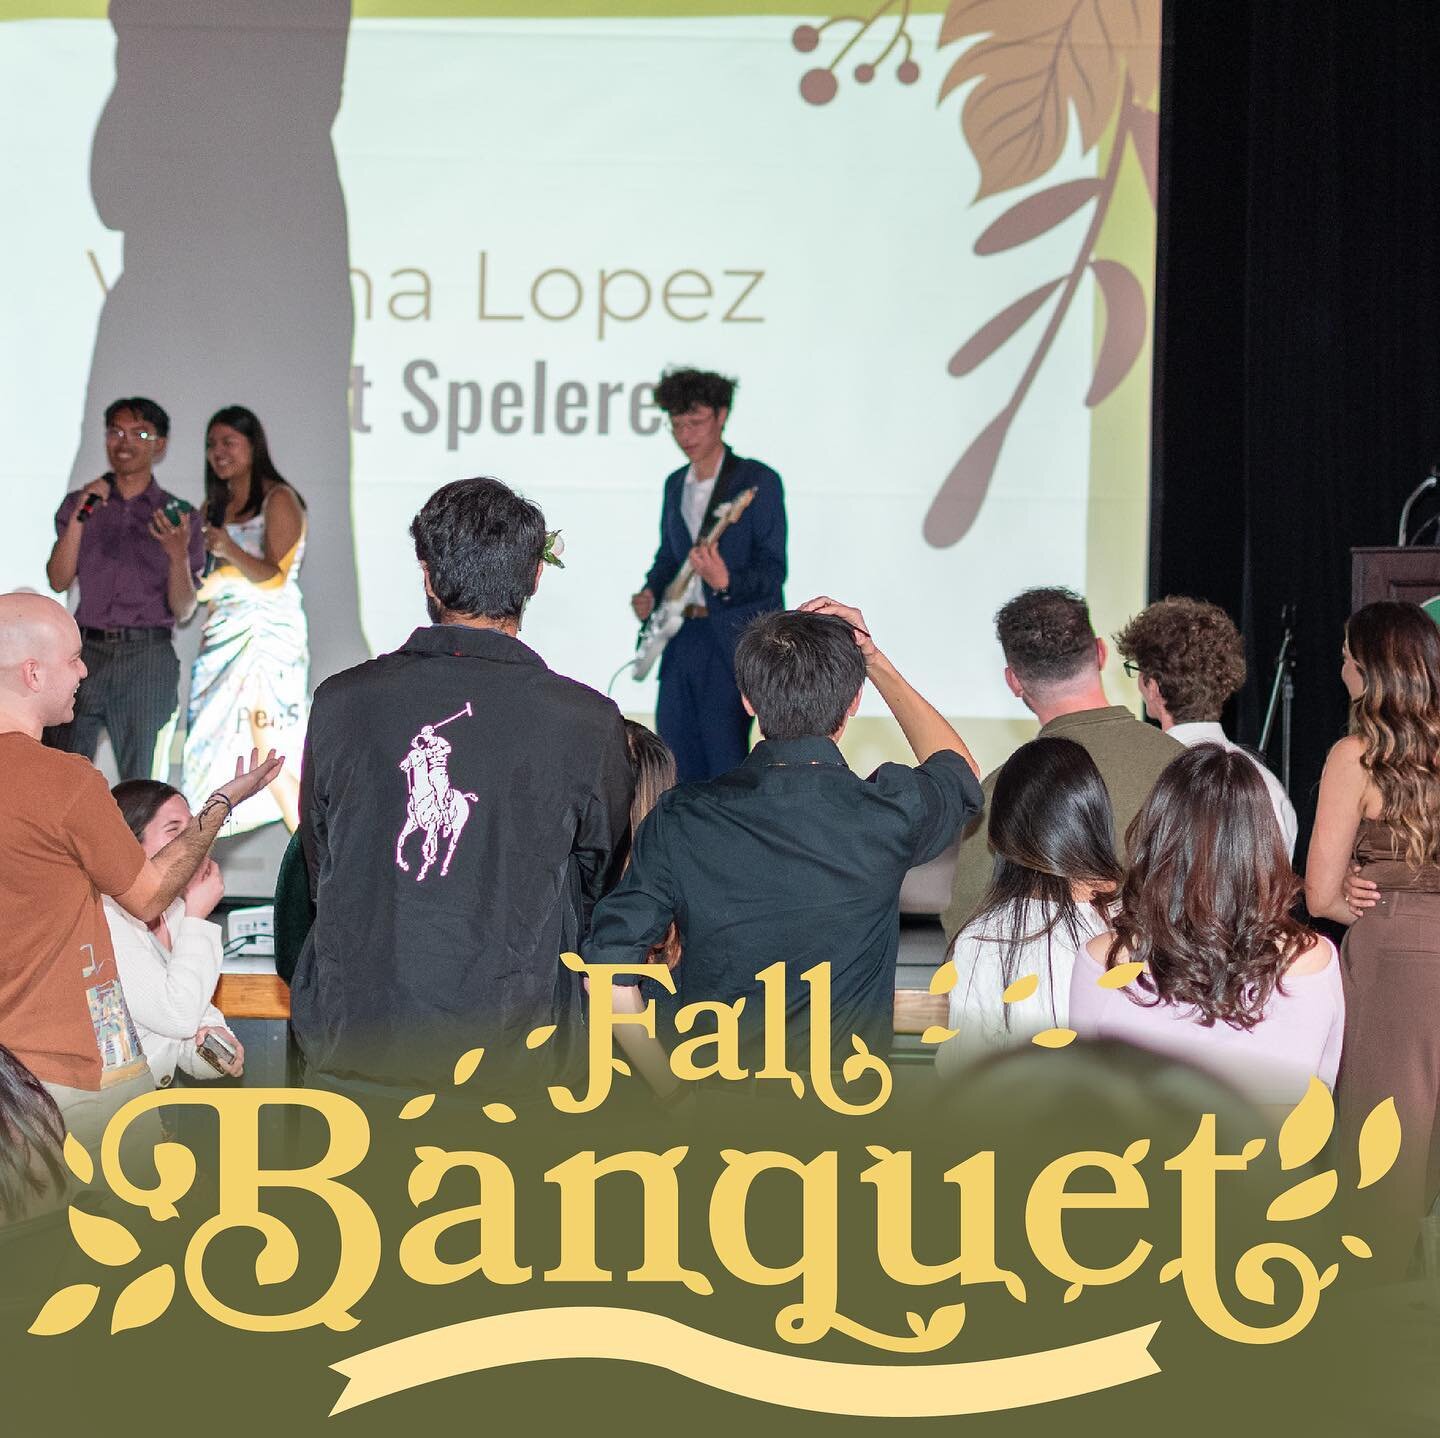 🍁✨ Fall Banquet 🍁✨
Special Thanks to our Fellowship VPS, Evan Kim and Saif Younis for hosting this Banquet! Our members celebrated with a potluck dinner while getting to watch performances from our very own members!

#apo #alphaphiomega #calpoly #c